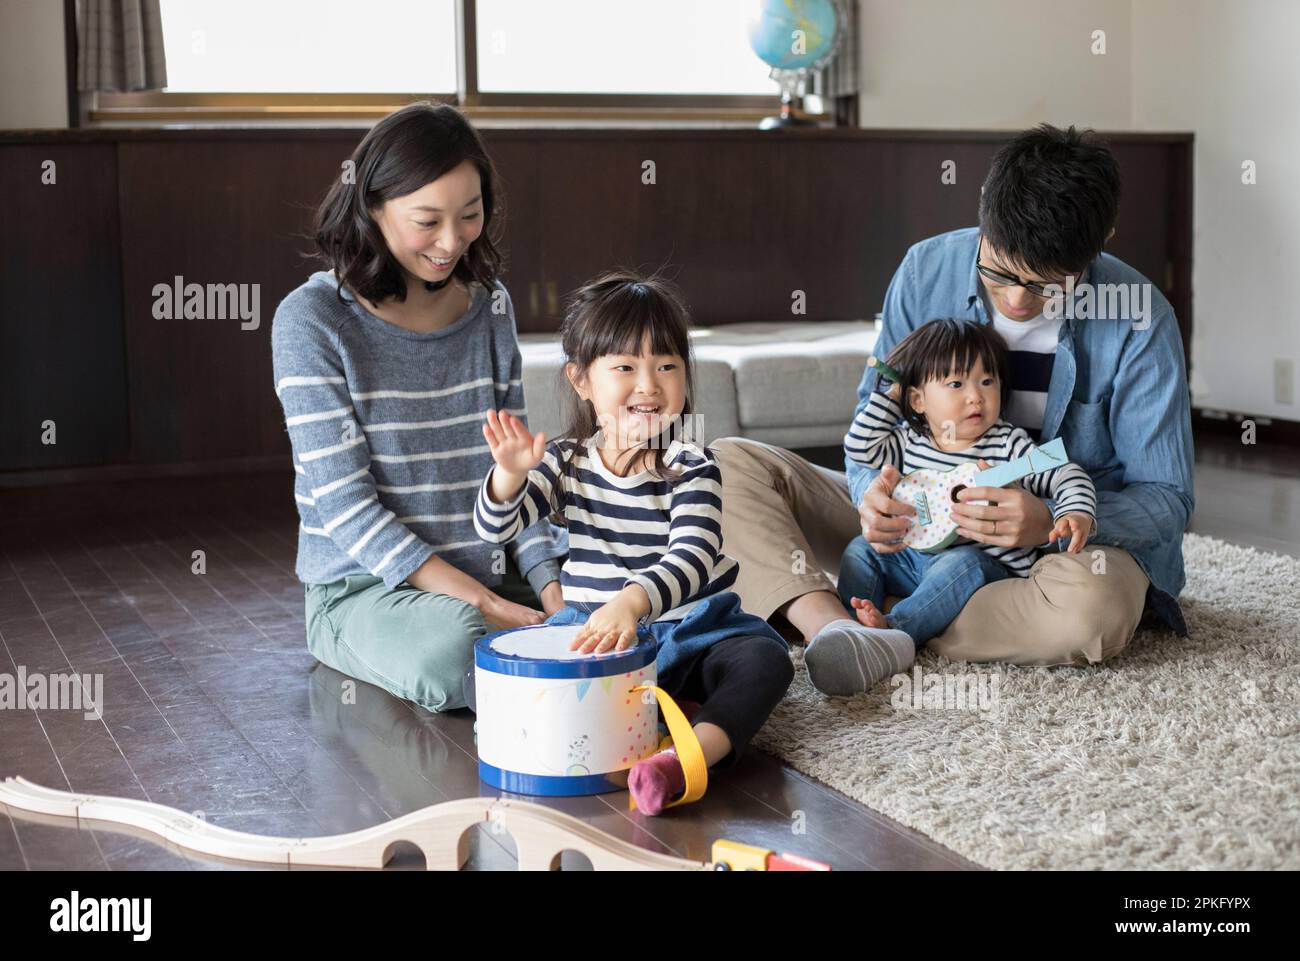 Sisters playing with handmade musical instrument toy and their parents watching Stock Photo